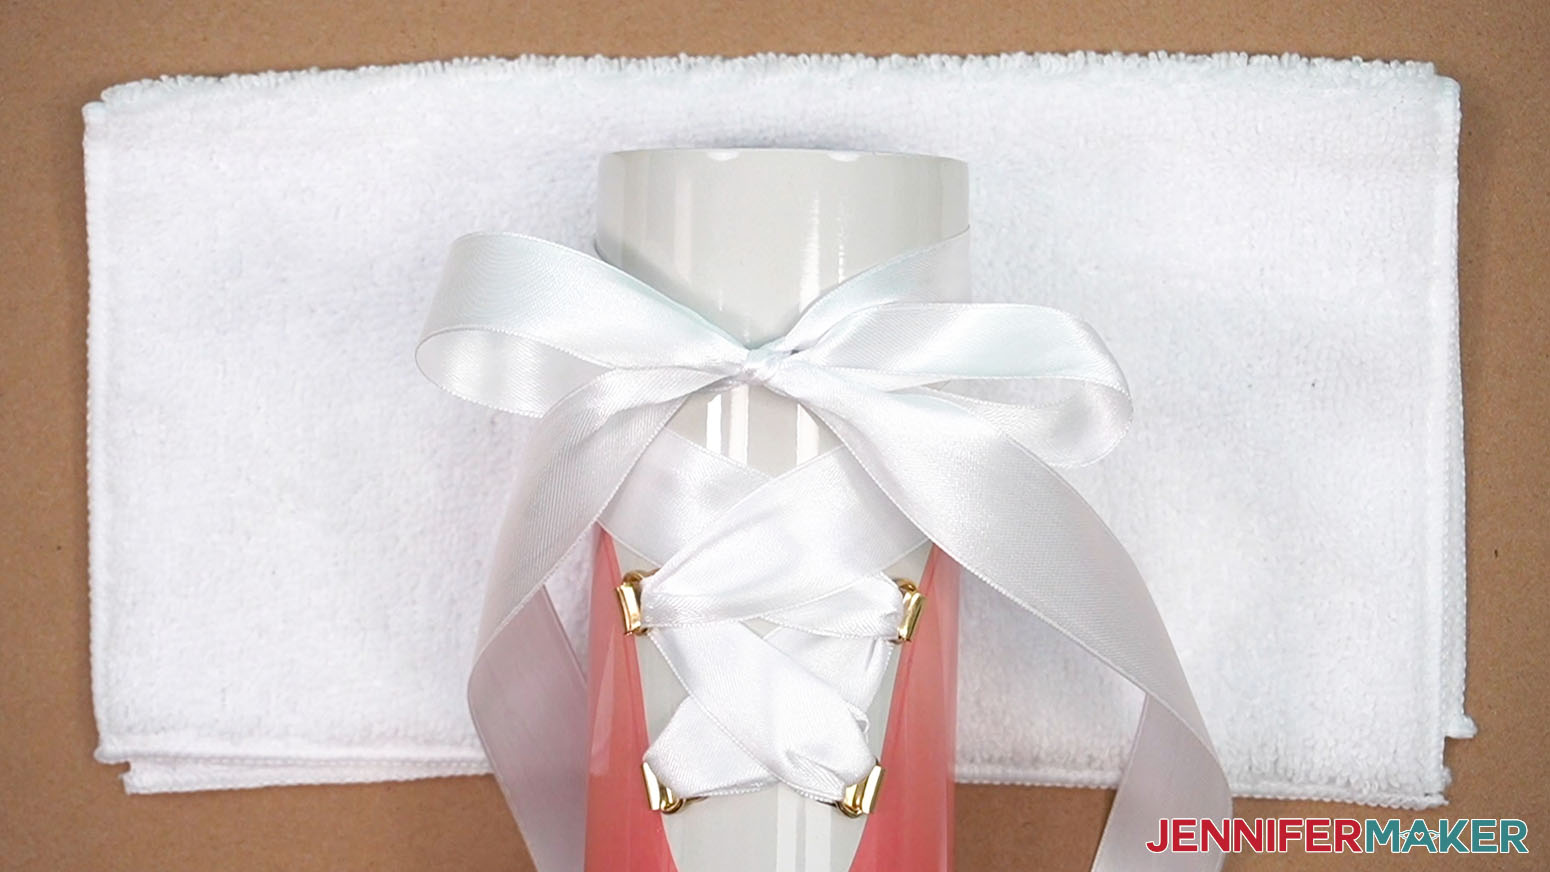 Bring the ribbons back to the front of the tumbler and tie in a bow.